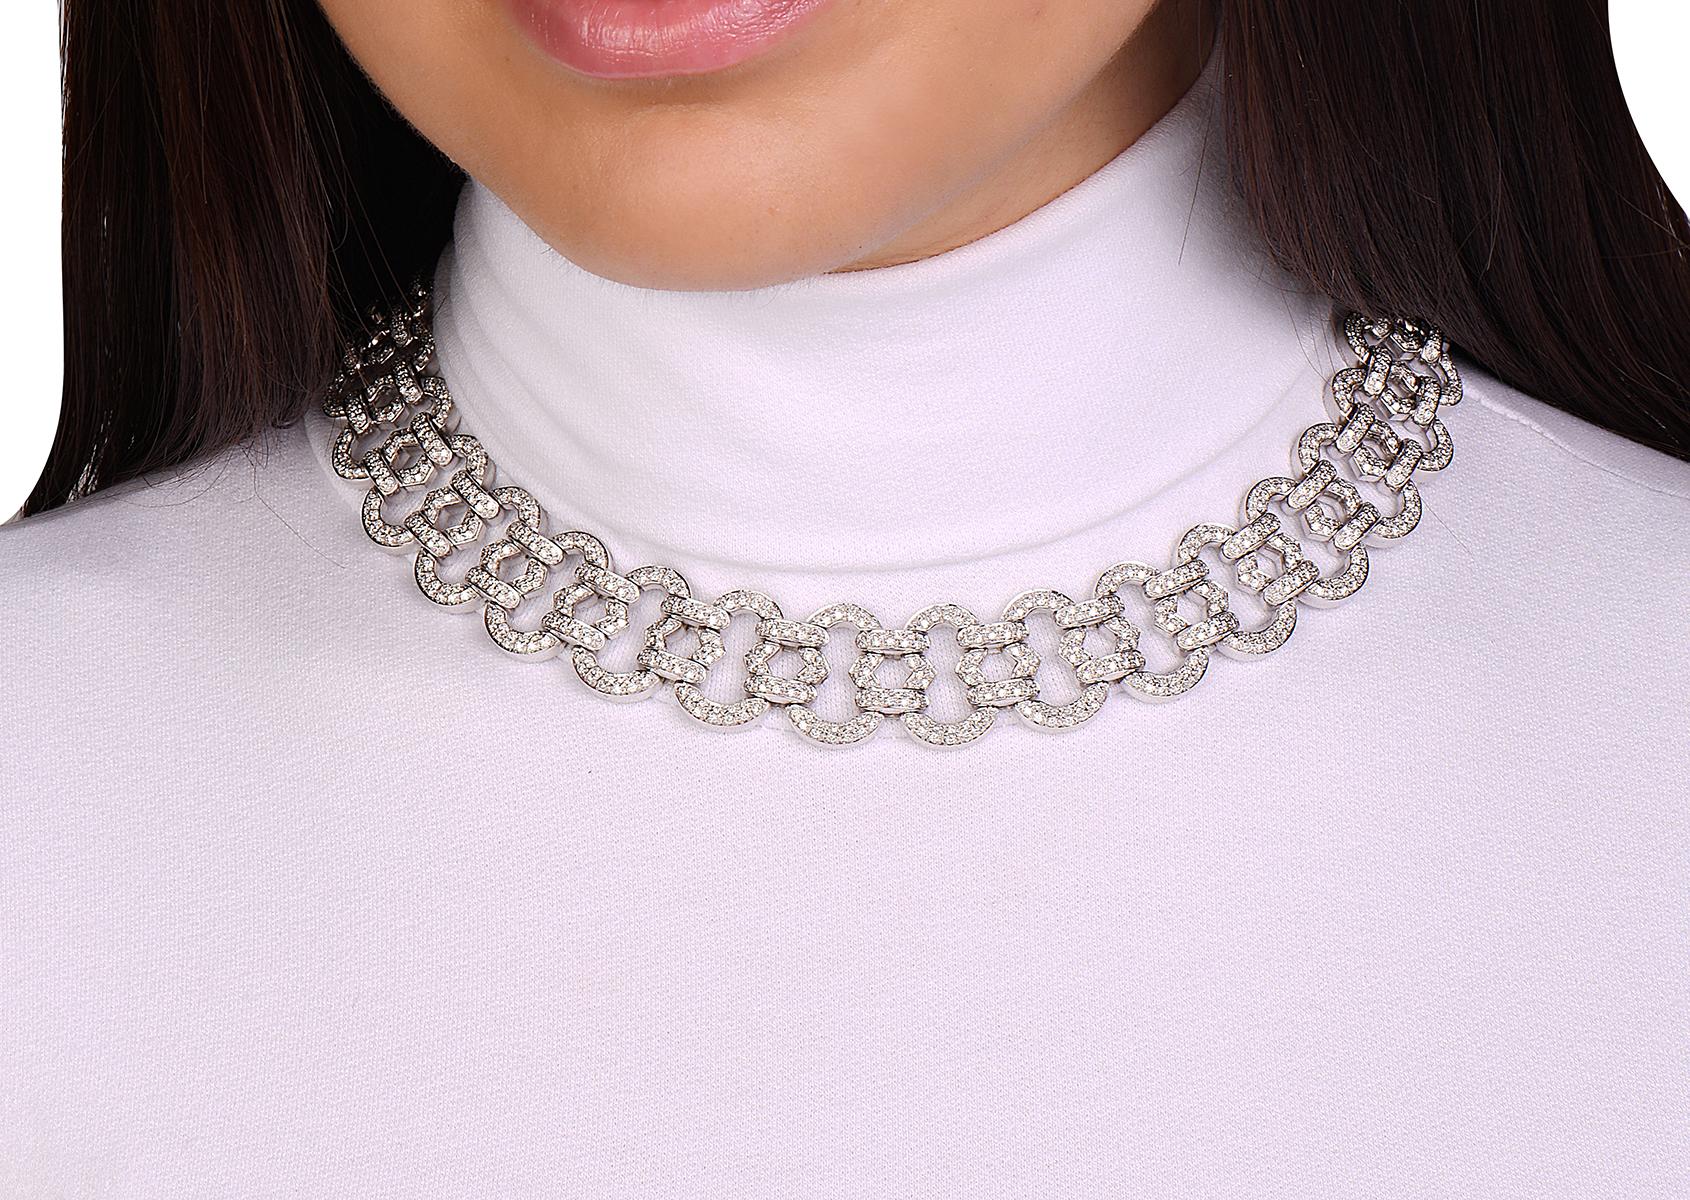 This necklace features 11.32 carats of G-H VS diamonds set in 18K white gold. This necklace was made in Italy with the highest quality standards of craftsmanship and is extremely flexible with a comfort fit. 6 3/4 inch length. 155.83 grams total